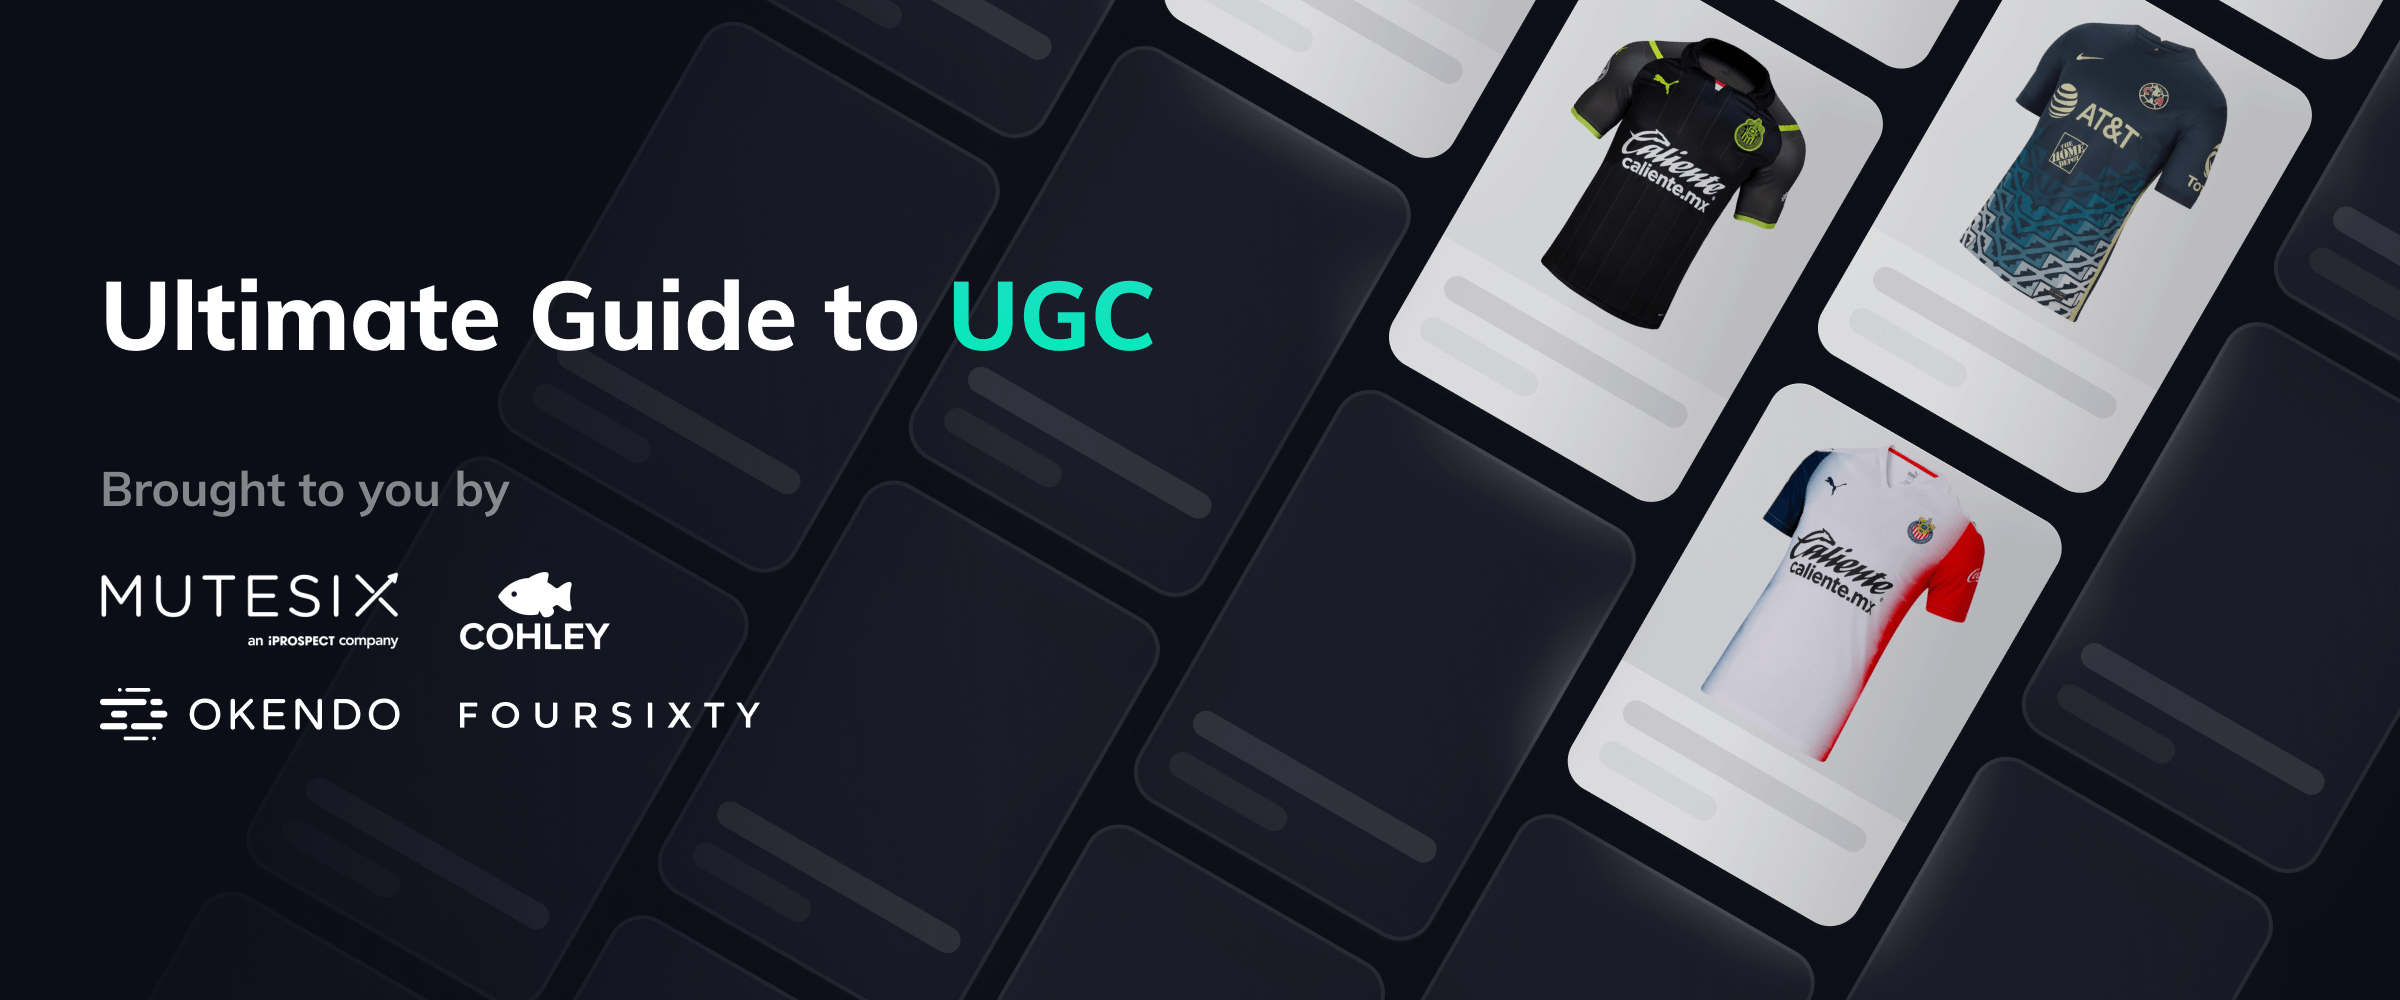 The Ultimate Guide to UGC